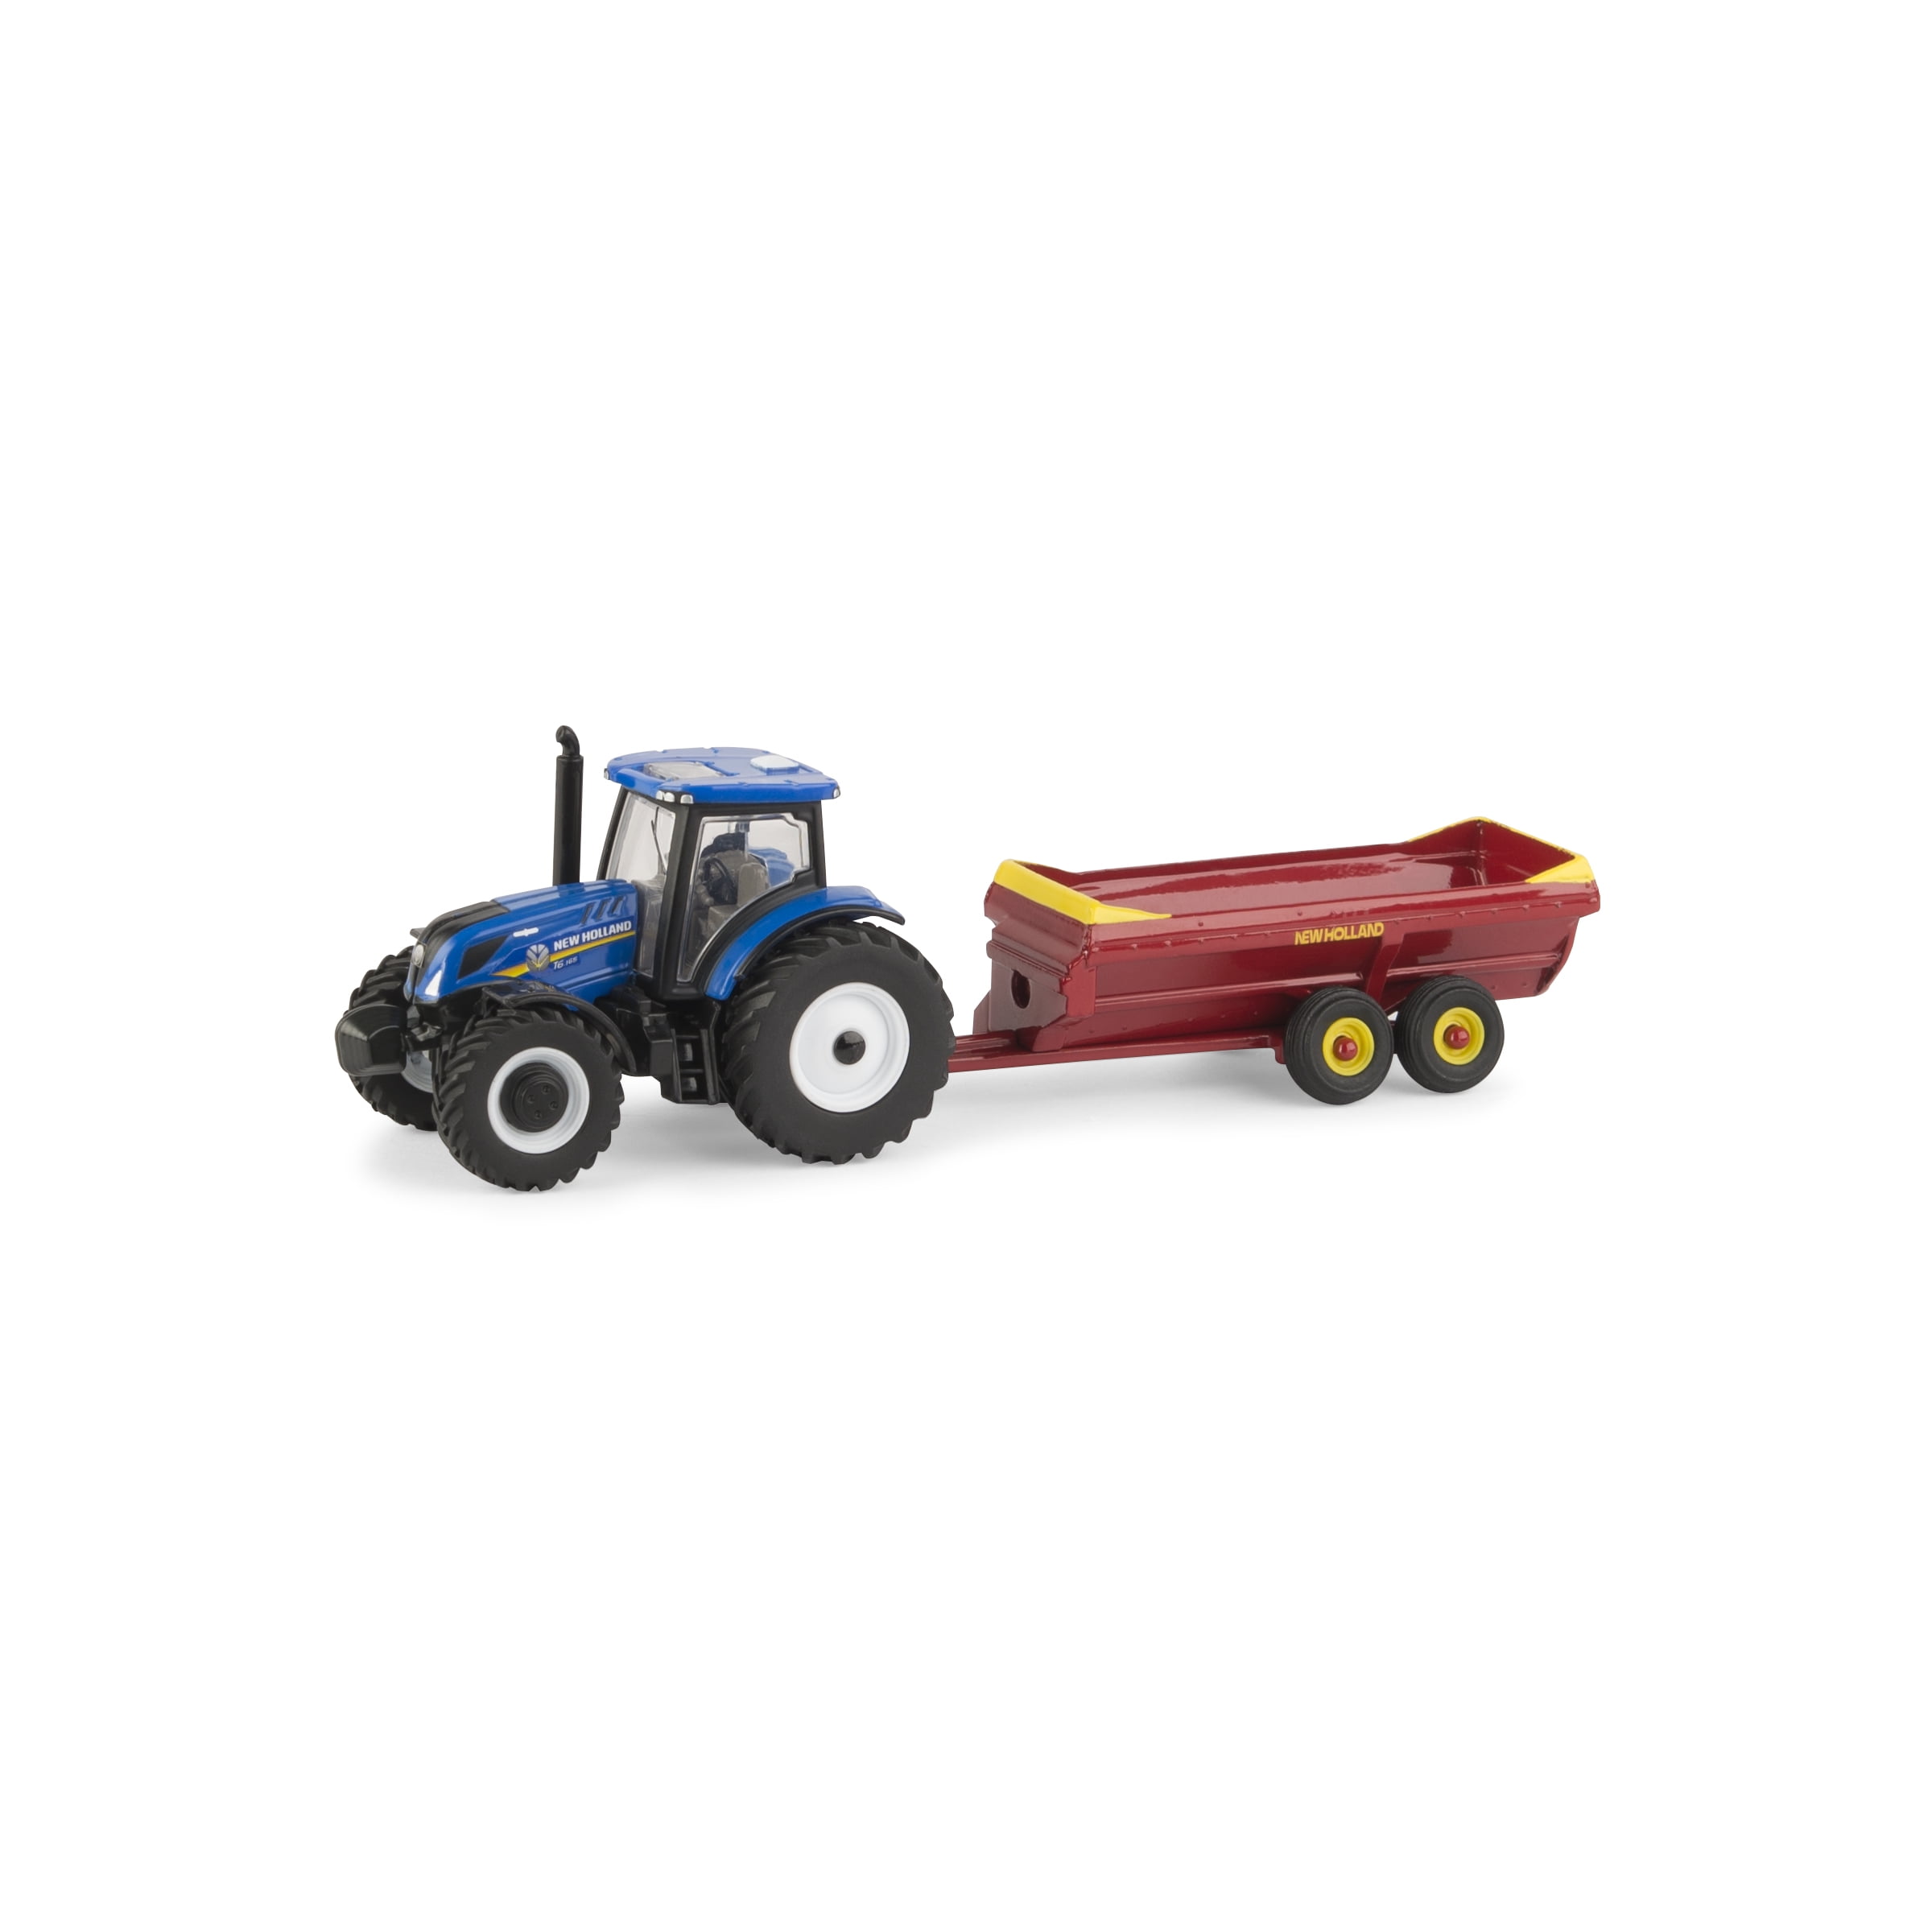 New Holland 1:64 Scale T6.165 Tractor with V-Tank Spreader Farm Toy Walmart.com